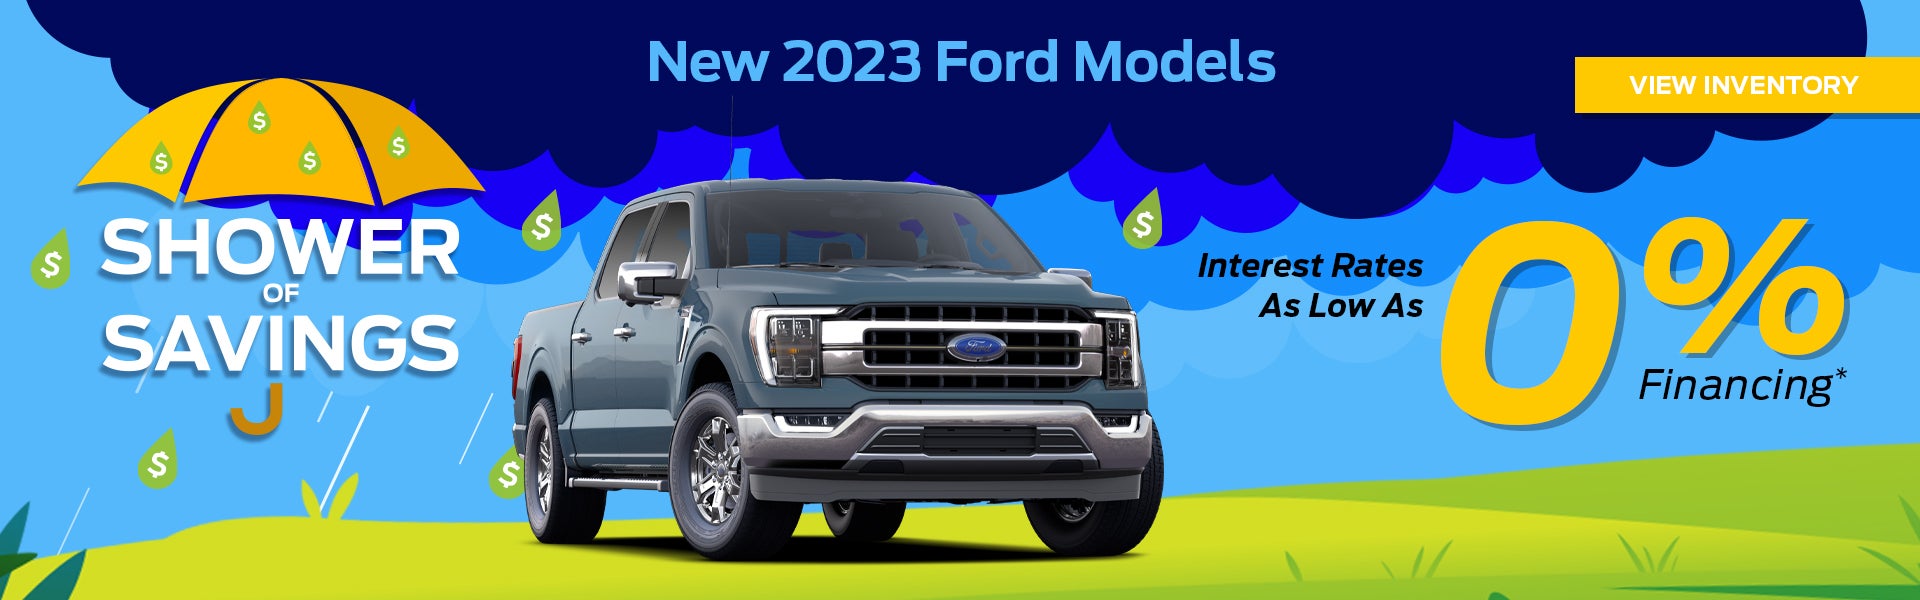 Enjoy financing as low as 0% APR on select new Ford models 